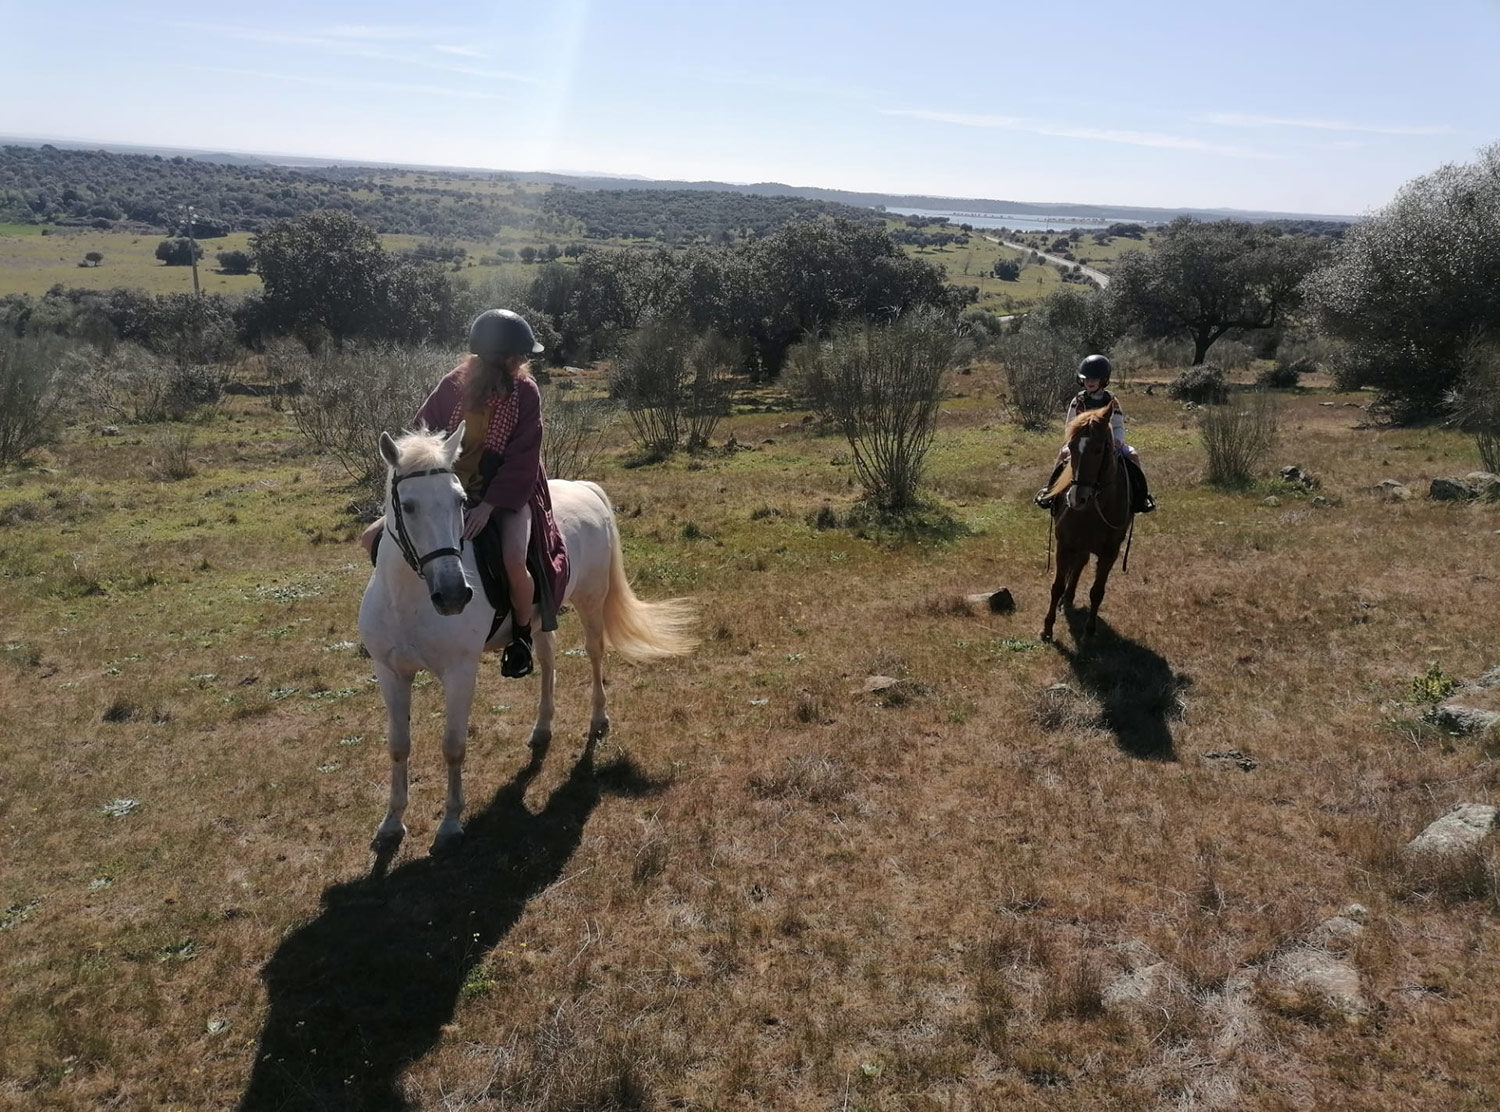 São Lourenço do Barrocal Exploring the area with my daughter by horse was magical. Apparently there are also 8 wild horses on the estate — free roaming following the abandonment of the estate after the Carnation revolution in 1974